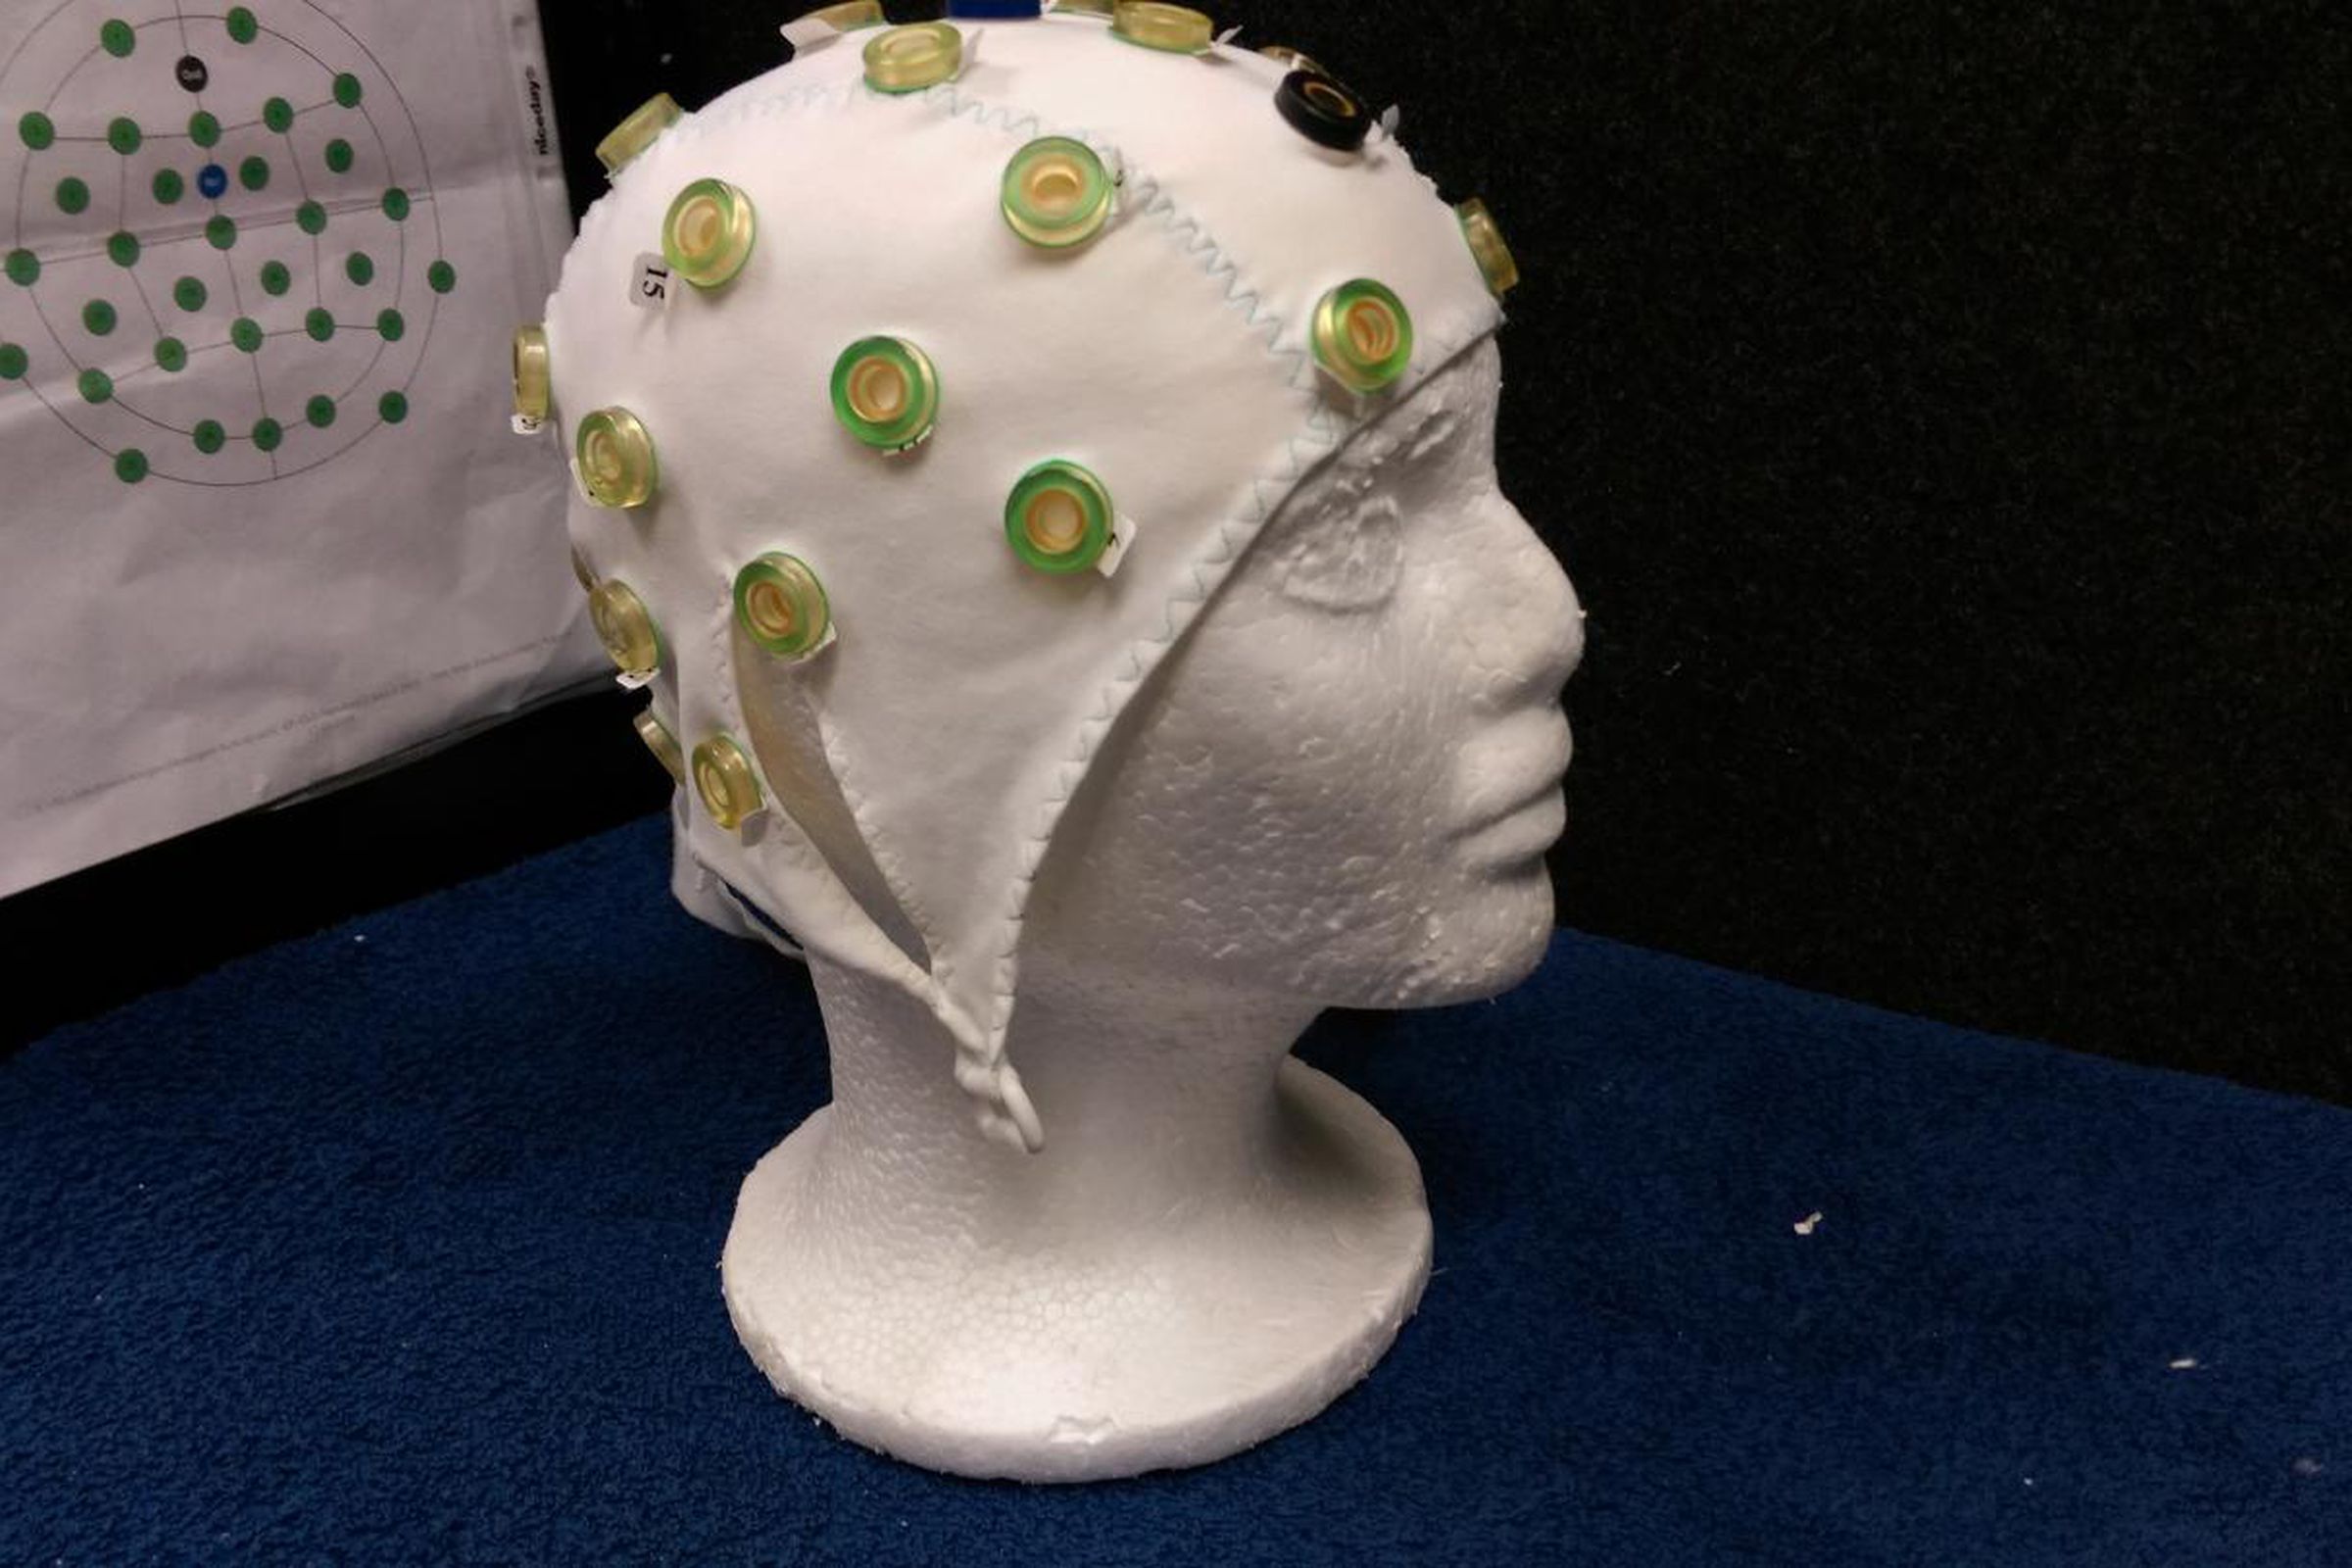 A cap used in the study to measure reaction to hearing language errors from native and non-native speakers